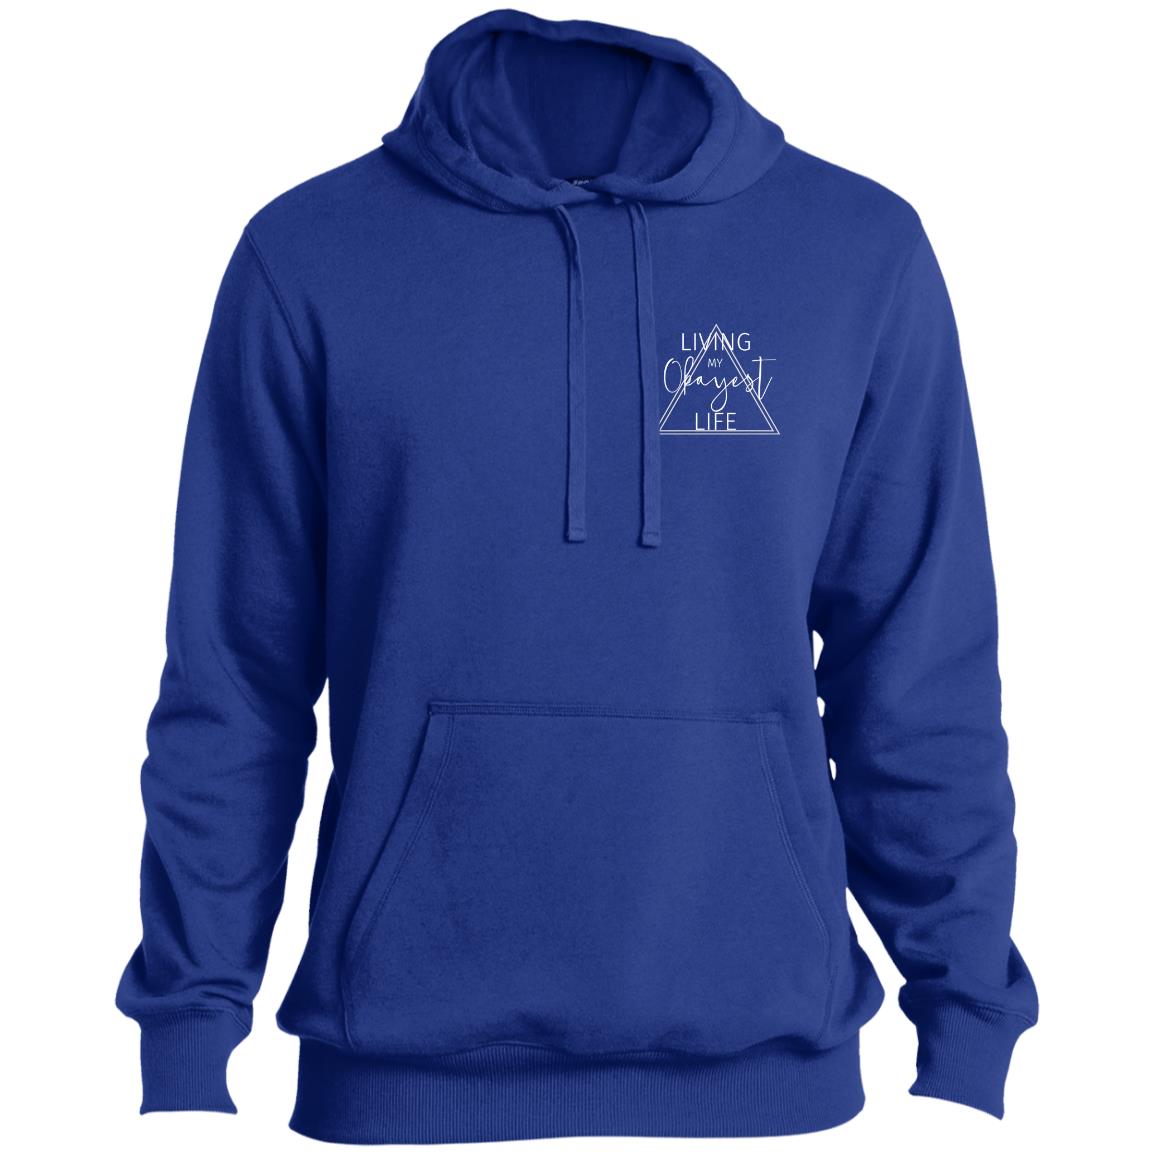 Okayest Life Triangle Tall Pullover Hoodie